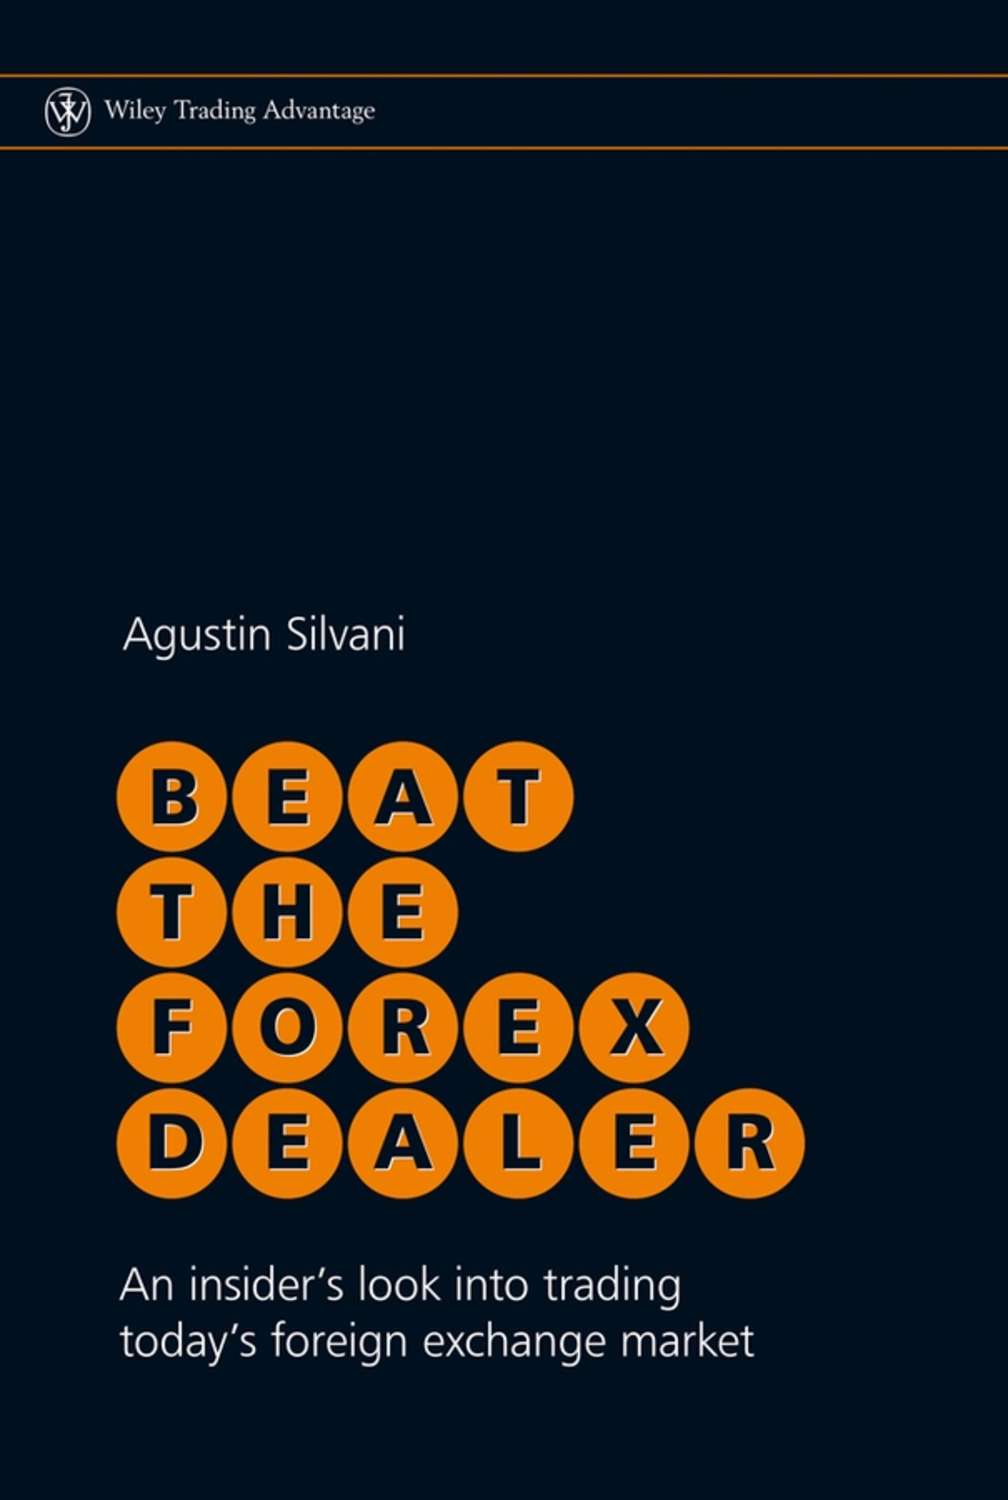 Agustin silvani forex opening of forex trading